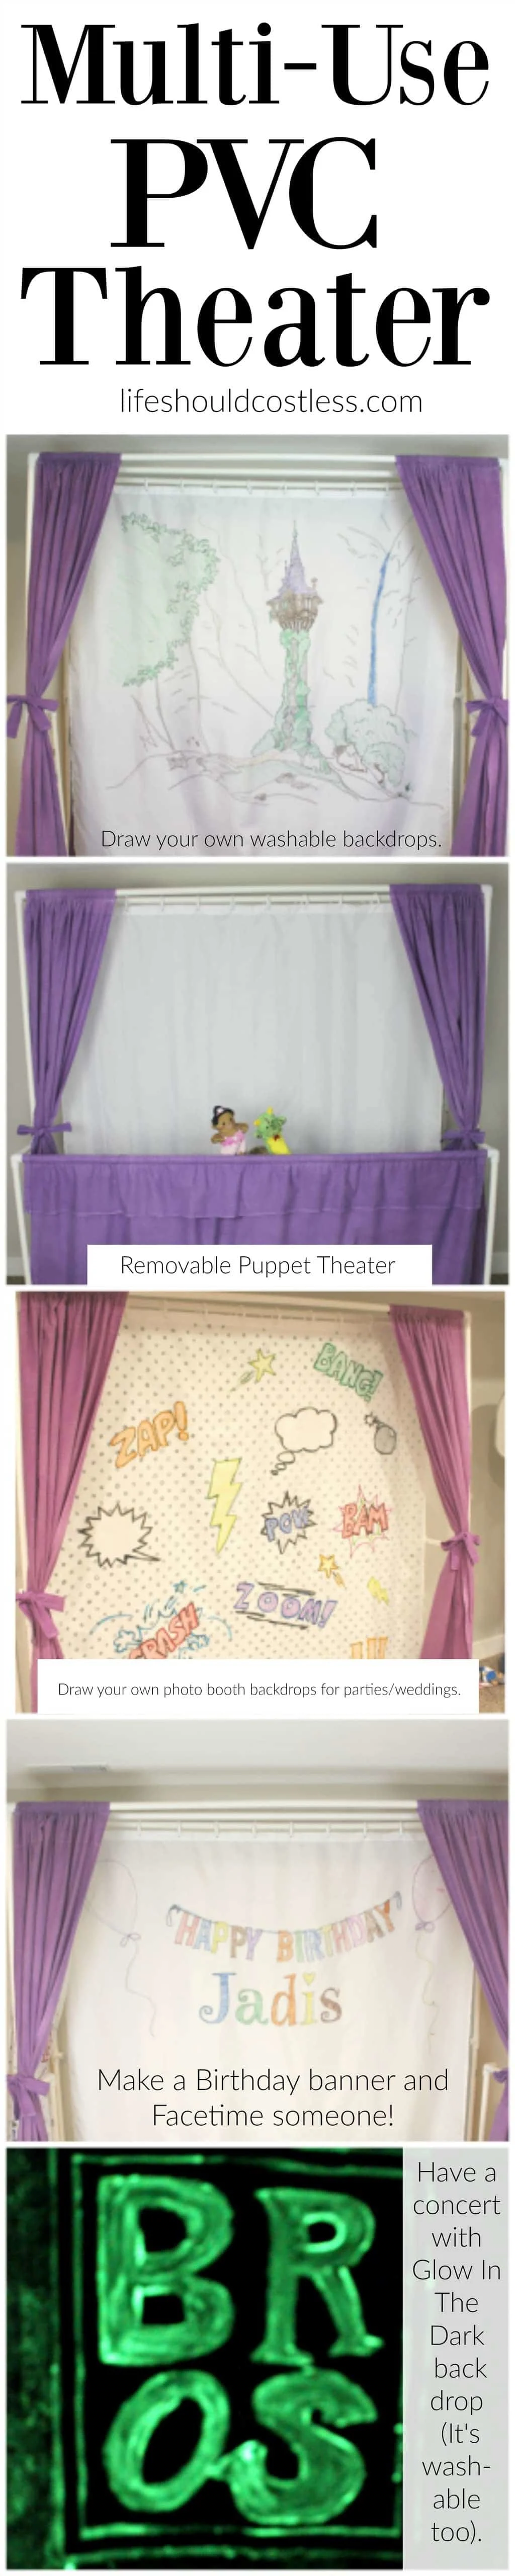 Multi-Use PVC Theater with washable and glow-in-the-dark backdrop options.